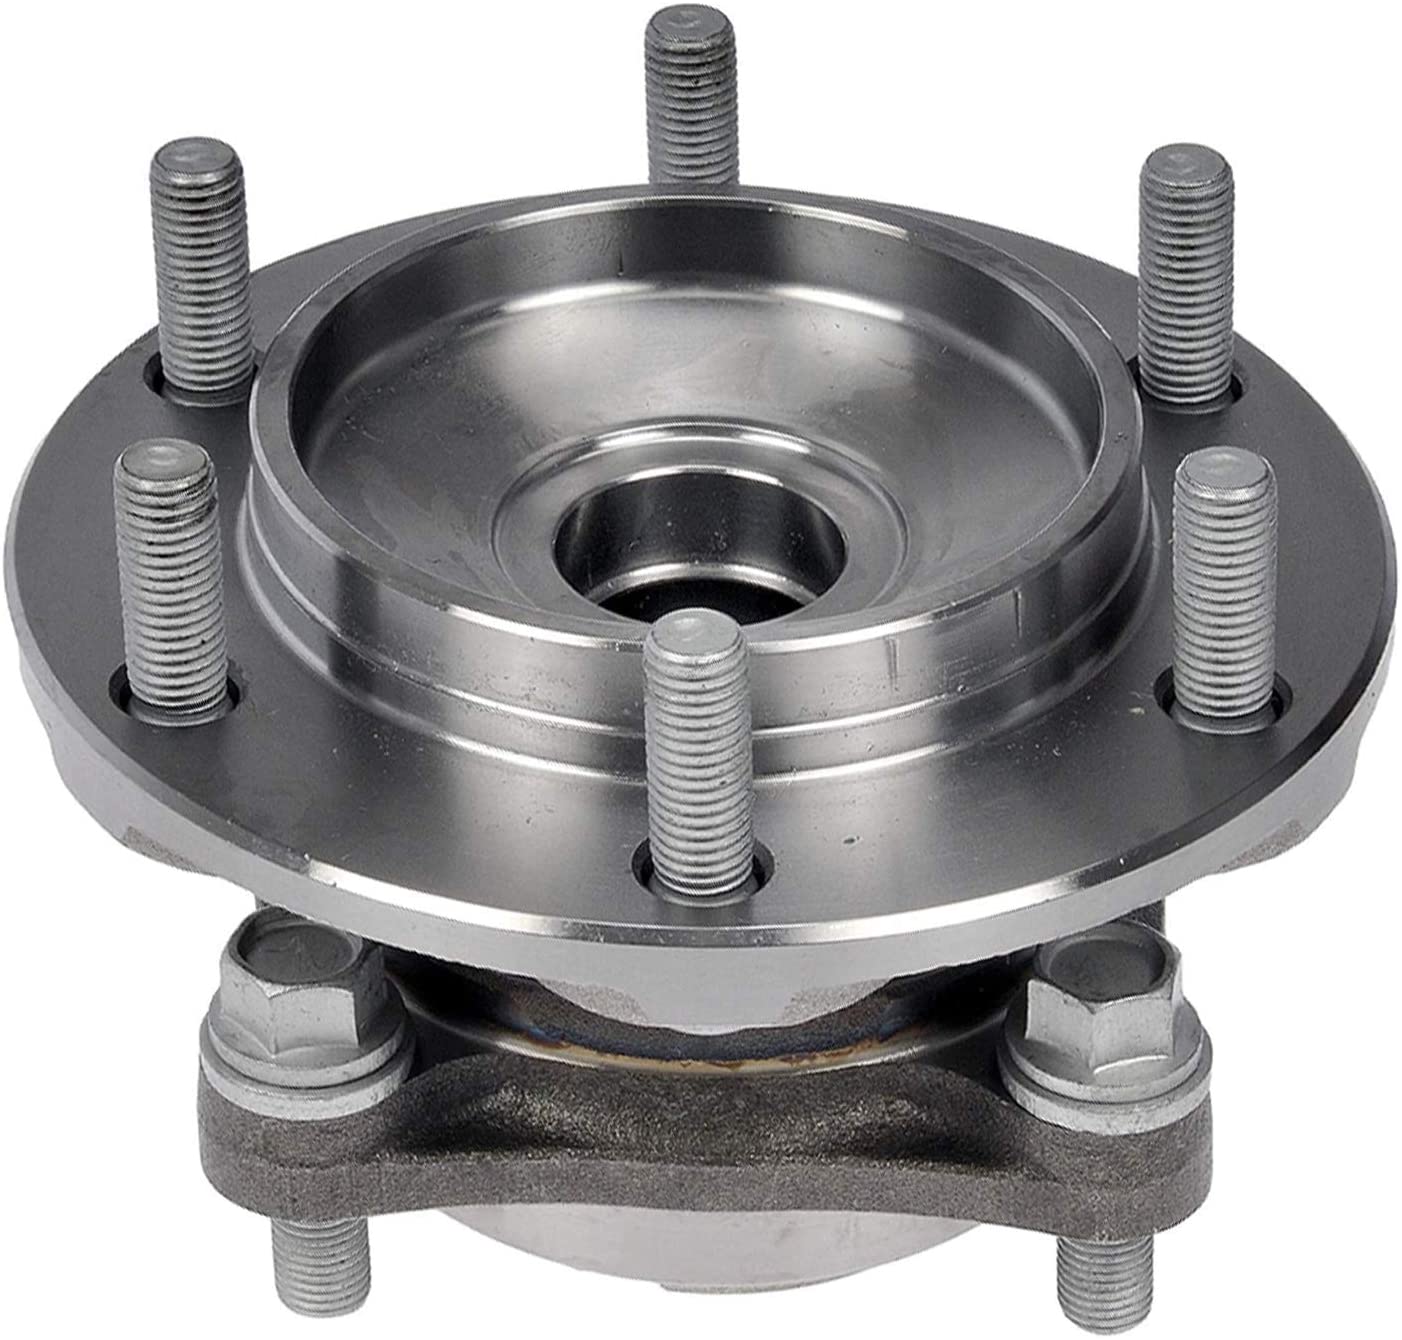 JADODE 950-004 2WD FRONT Wheel Bearing Hub Assembly for Toyota 4Runner Tacoma FJ Cruiser Hilux